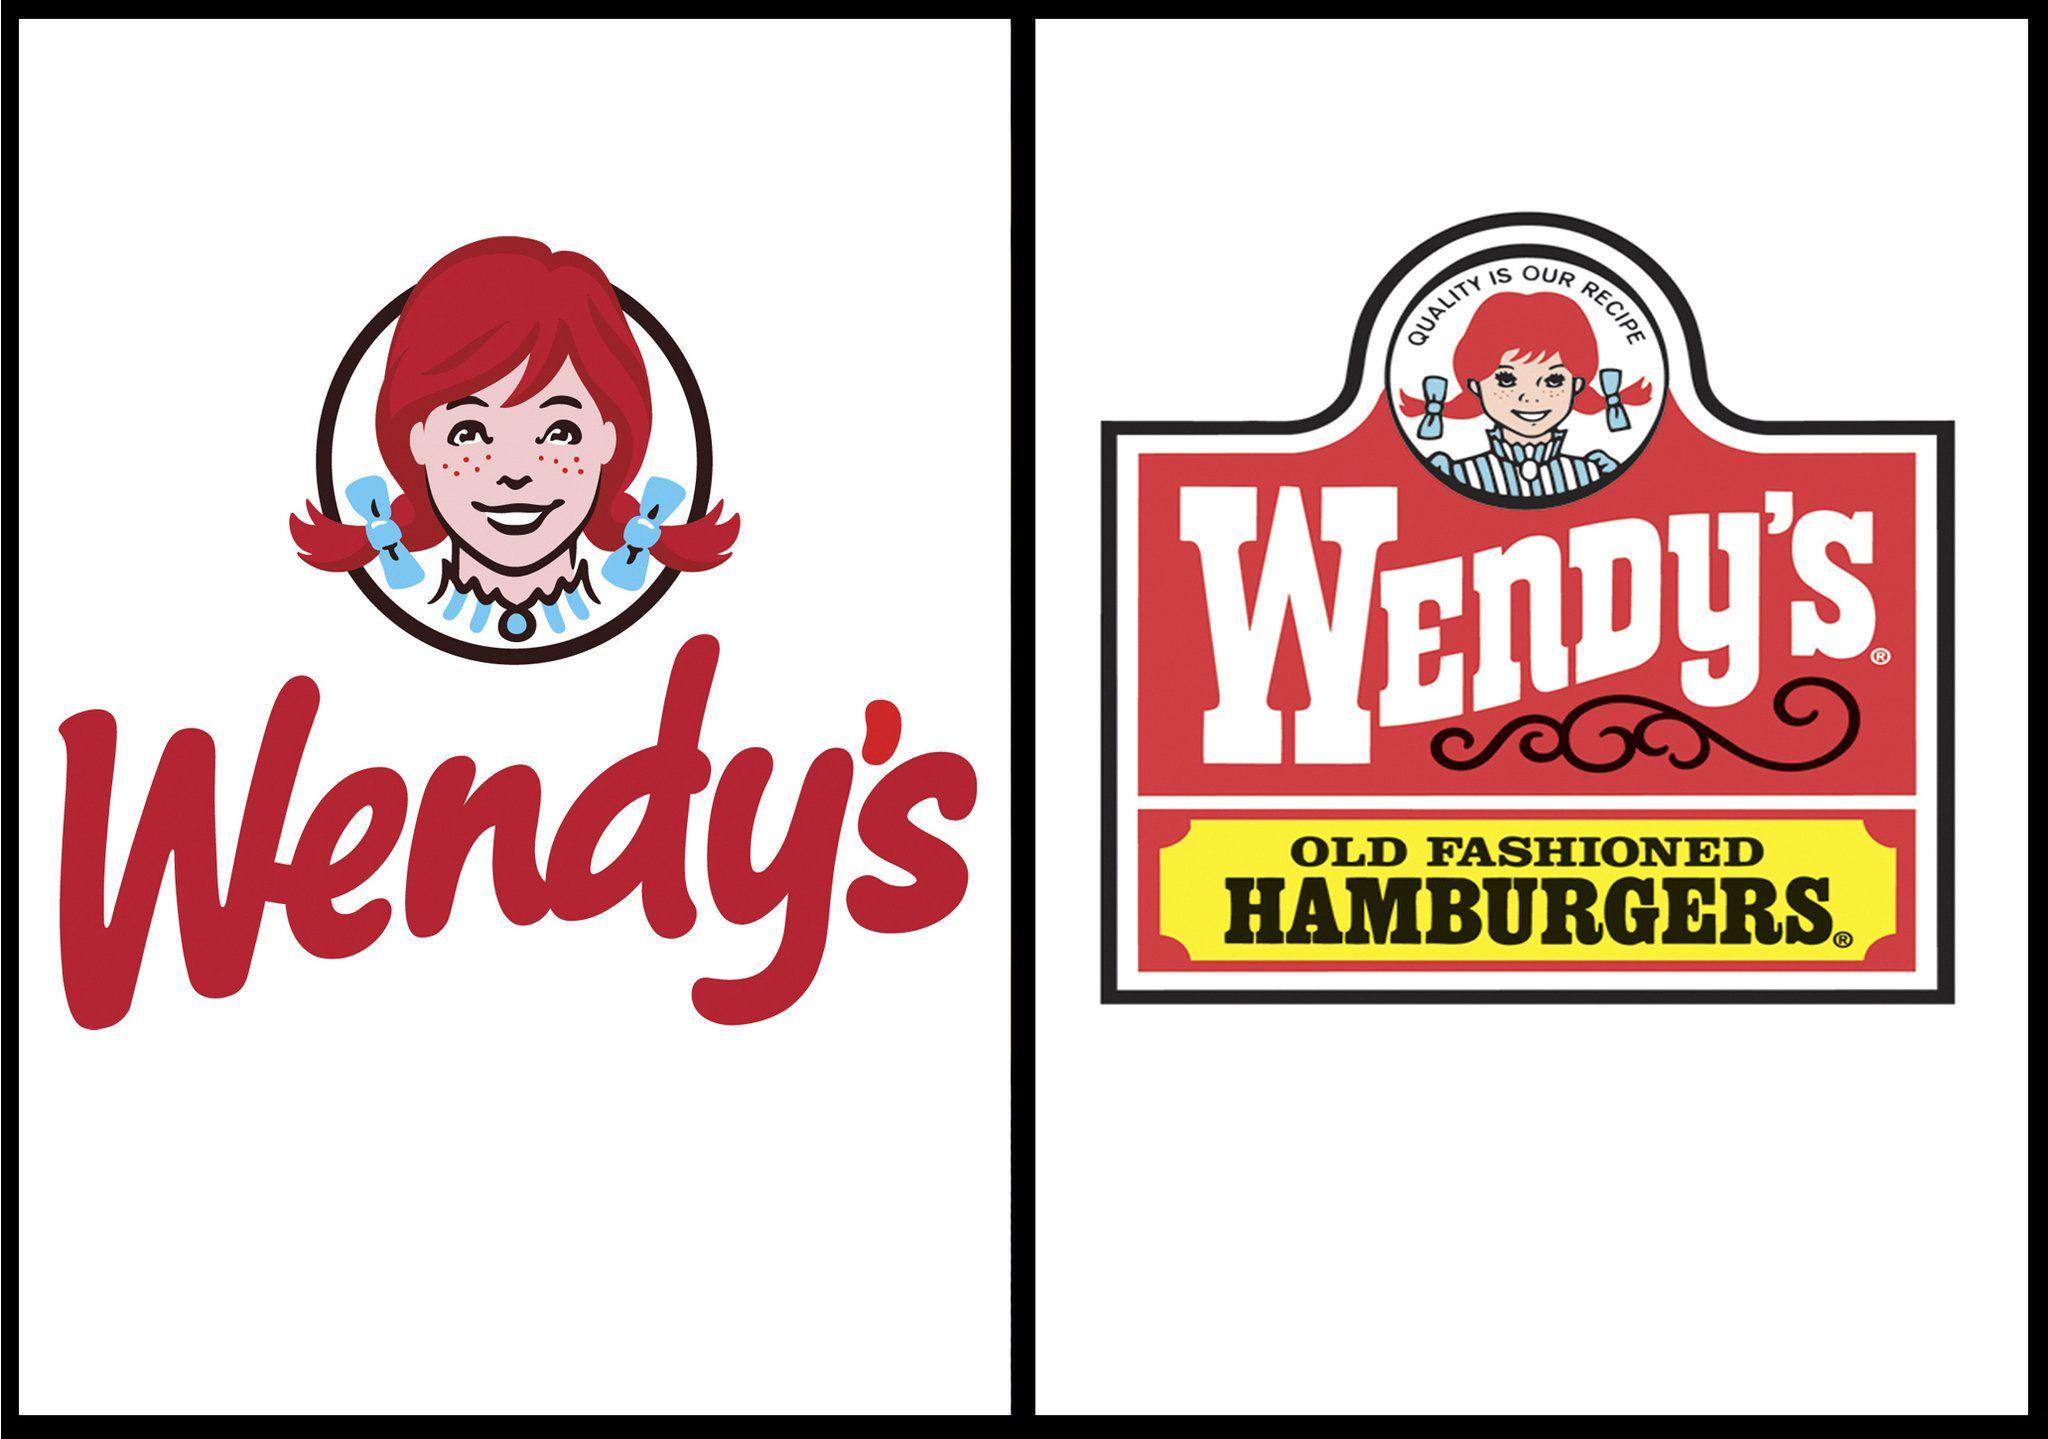 Wendy's New Logo - Wendy's logo gets a makeover